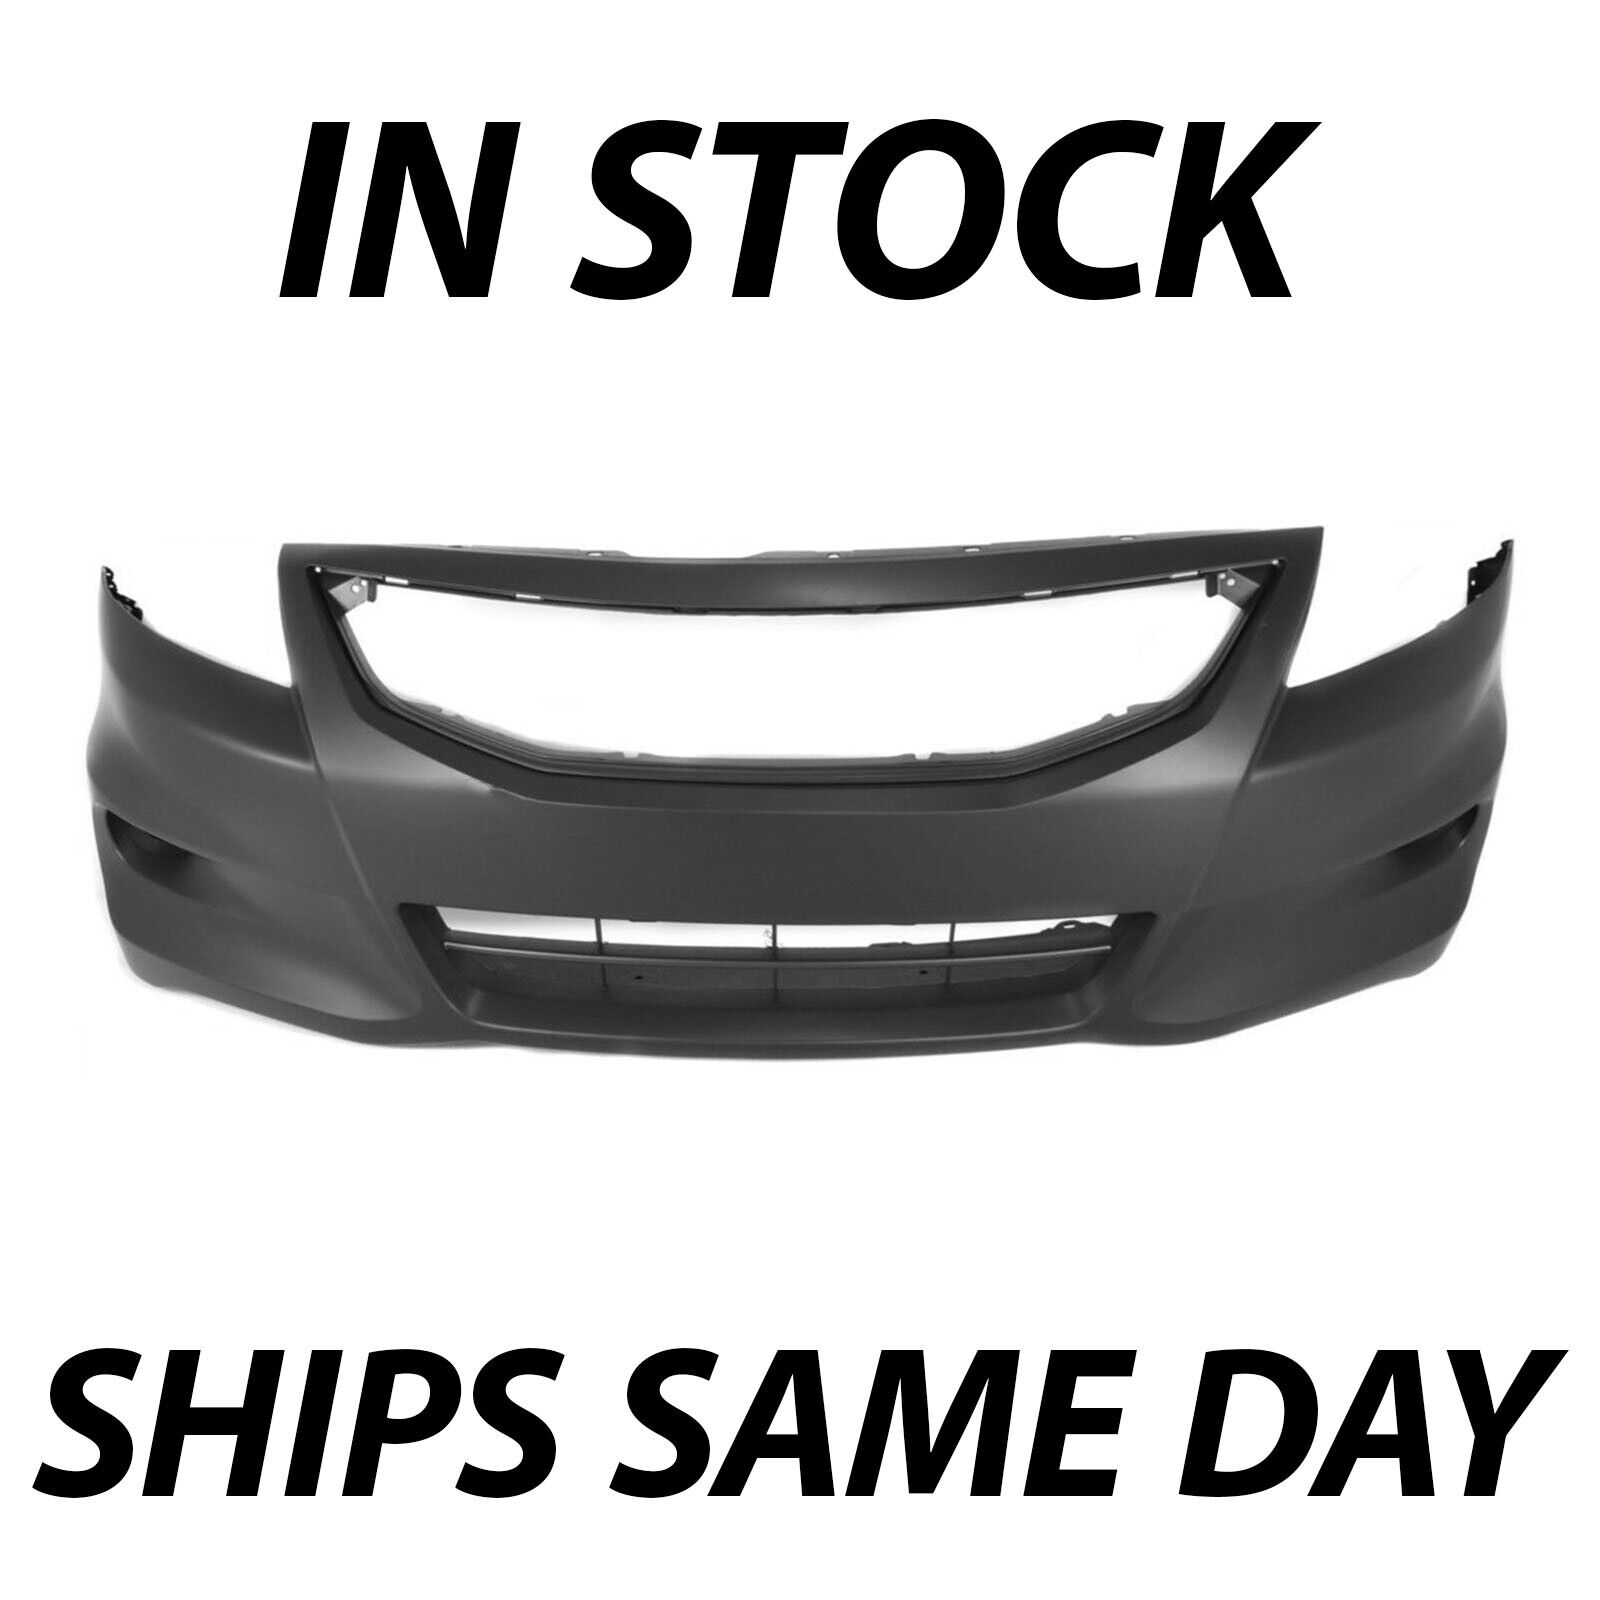 NEW Primered - Front Bumper Fascia Cover for 2011 2012 Honda Accord Coupe 2-door